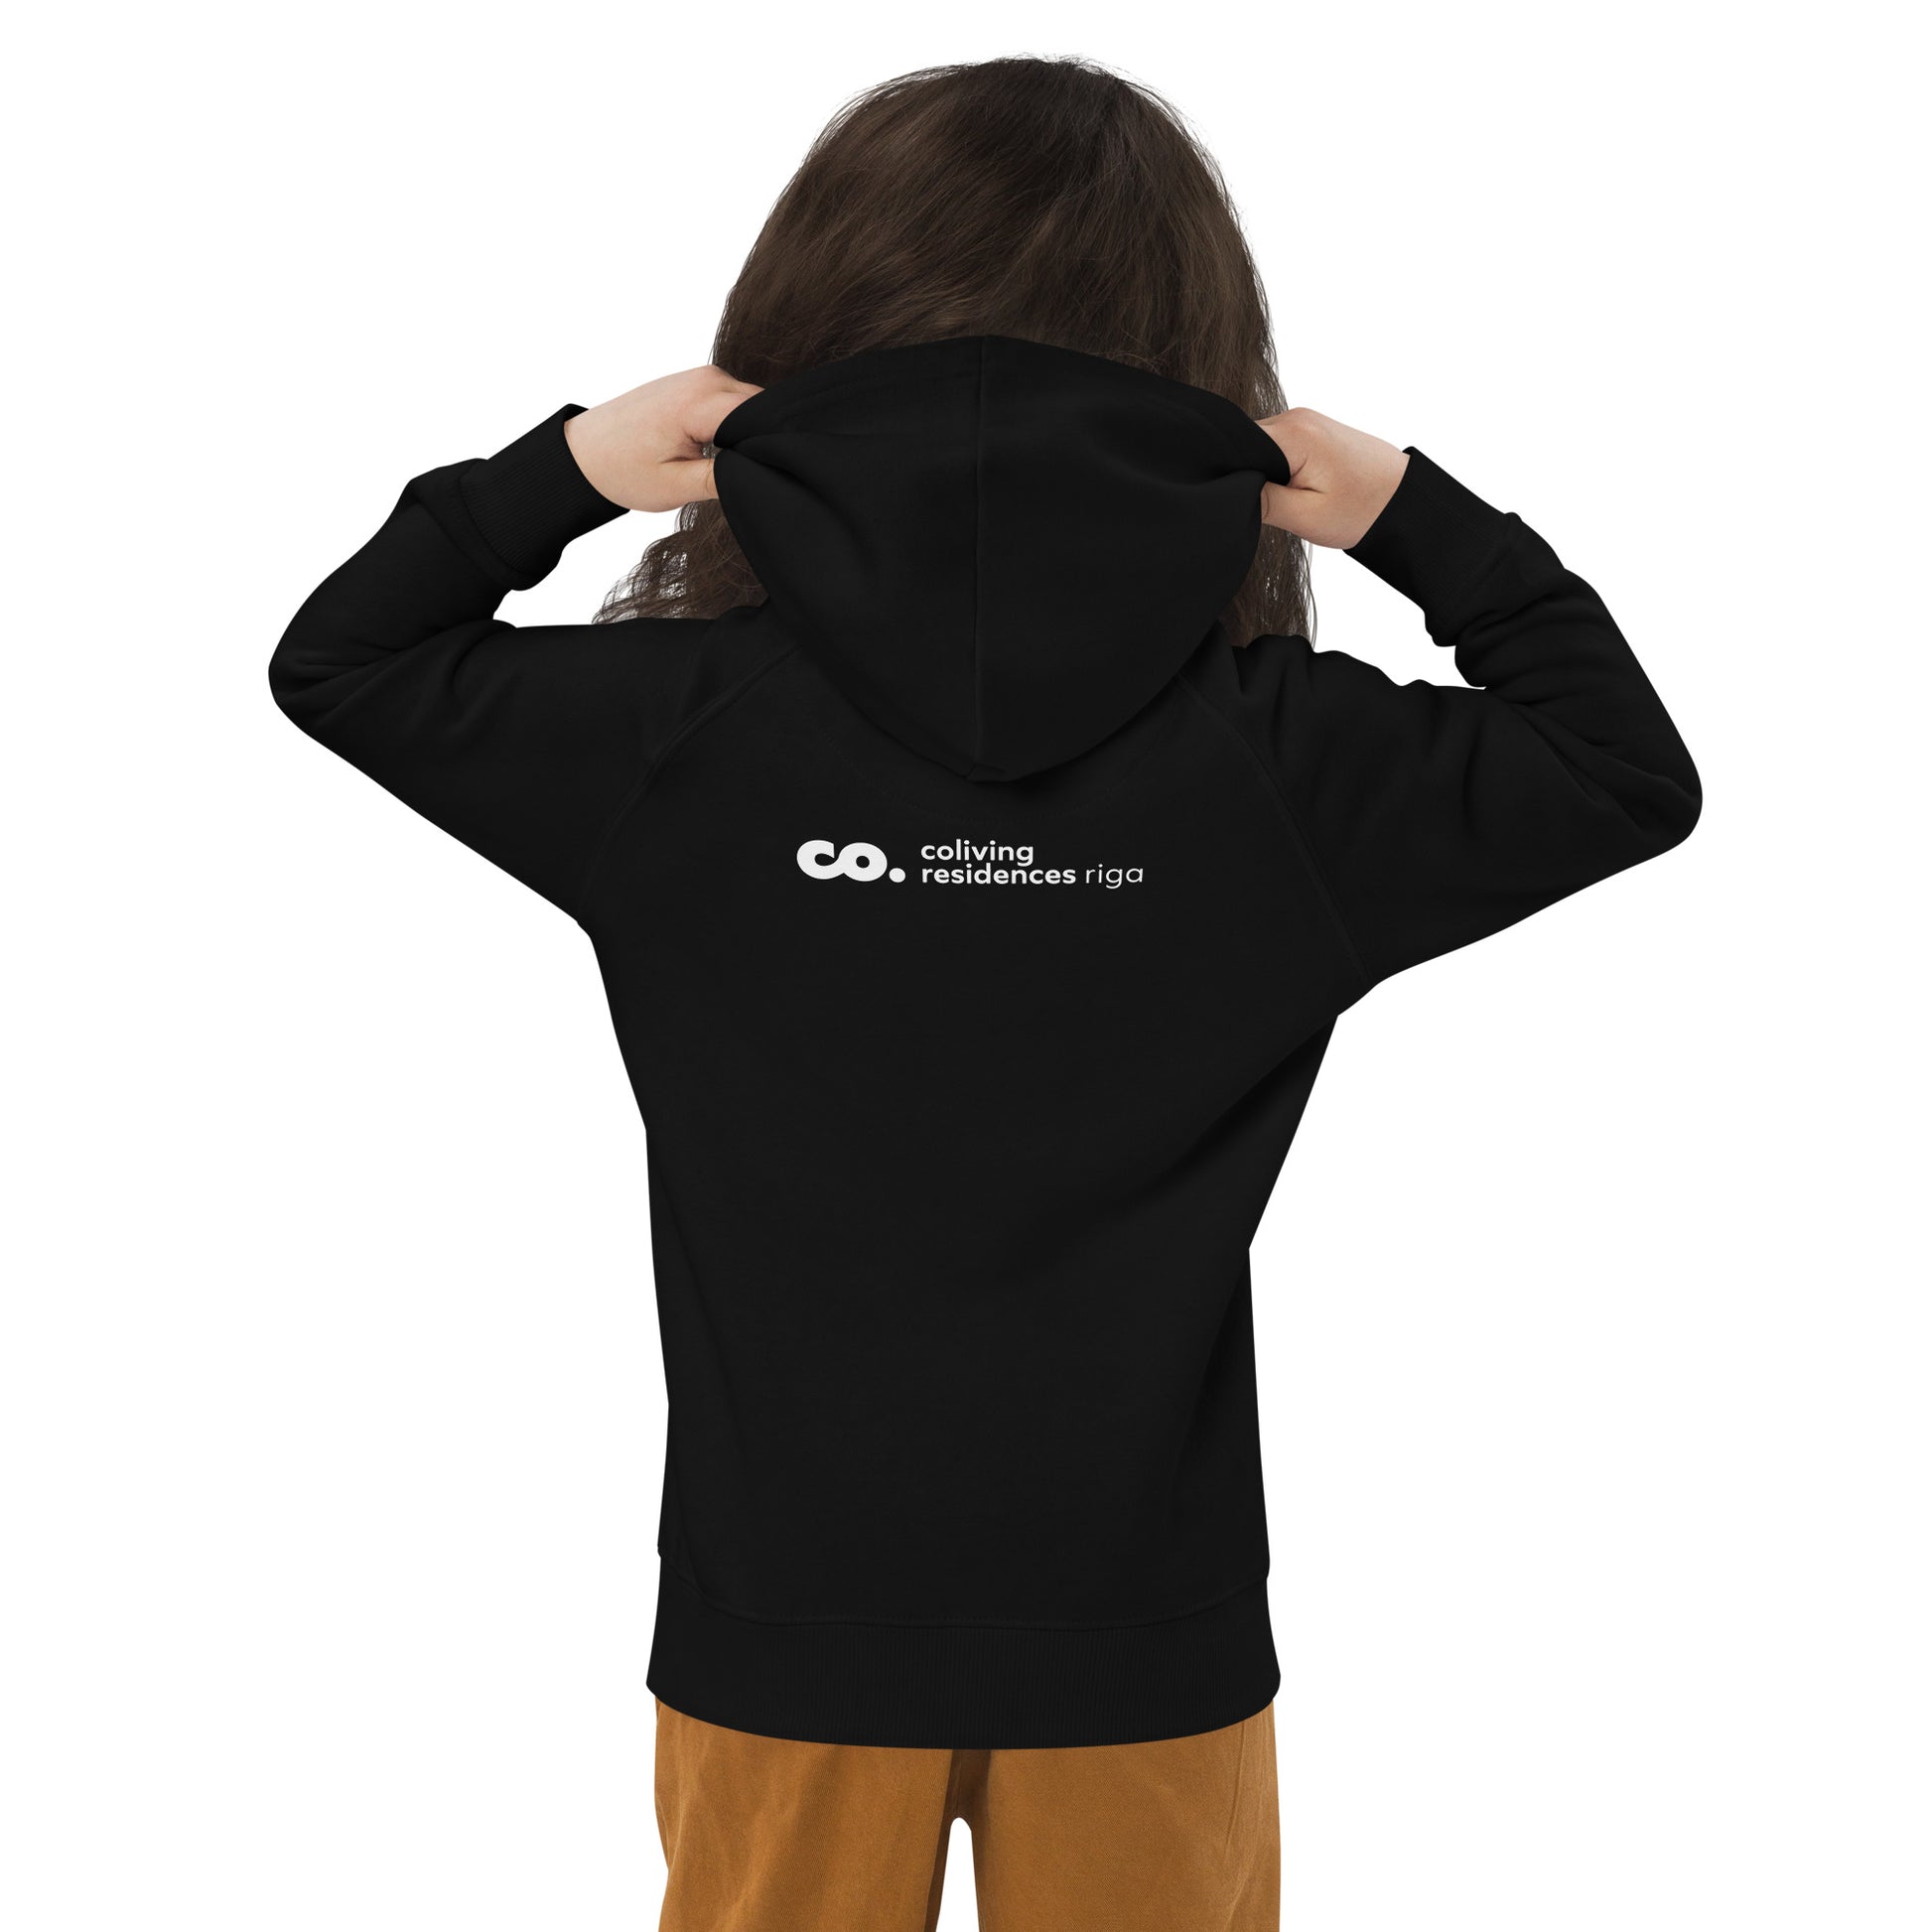 Little girl from back with black hoodie and coliving residences logo